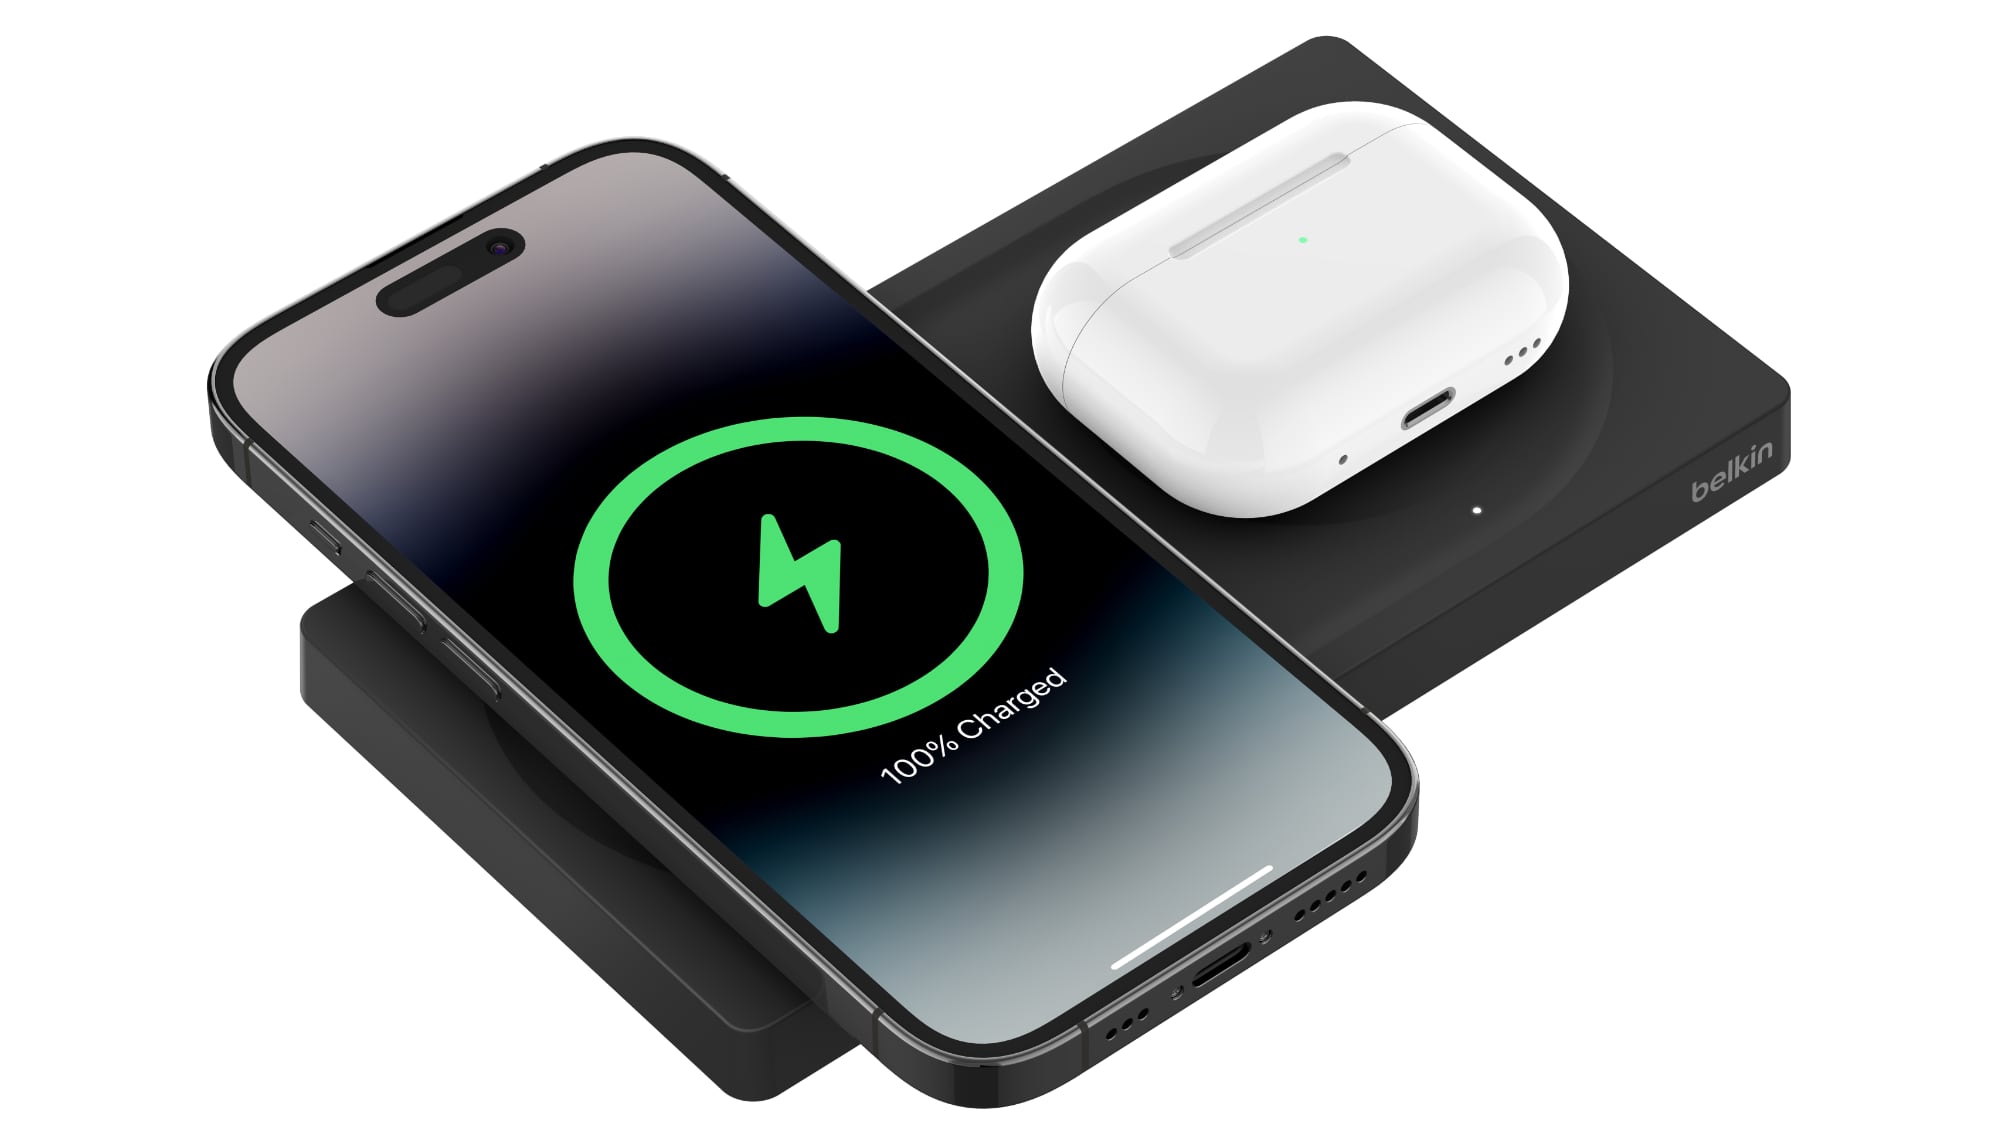 Japanese Company Unveils Incredible Wireless Charger 'Powered' By